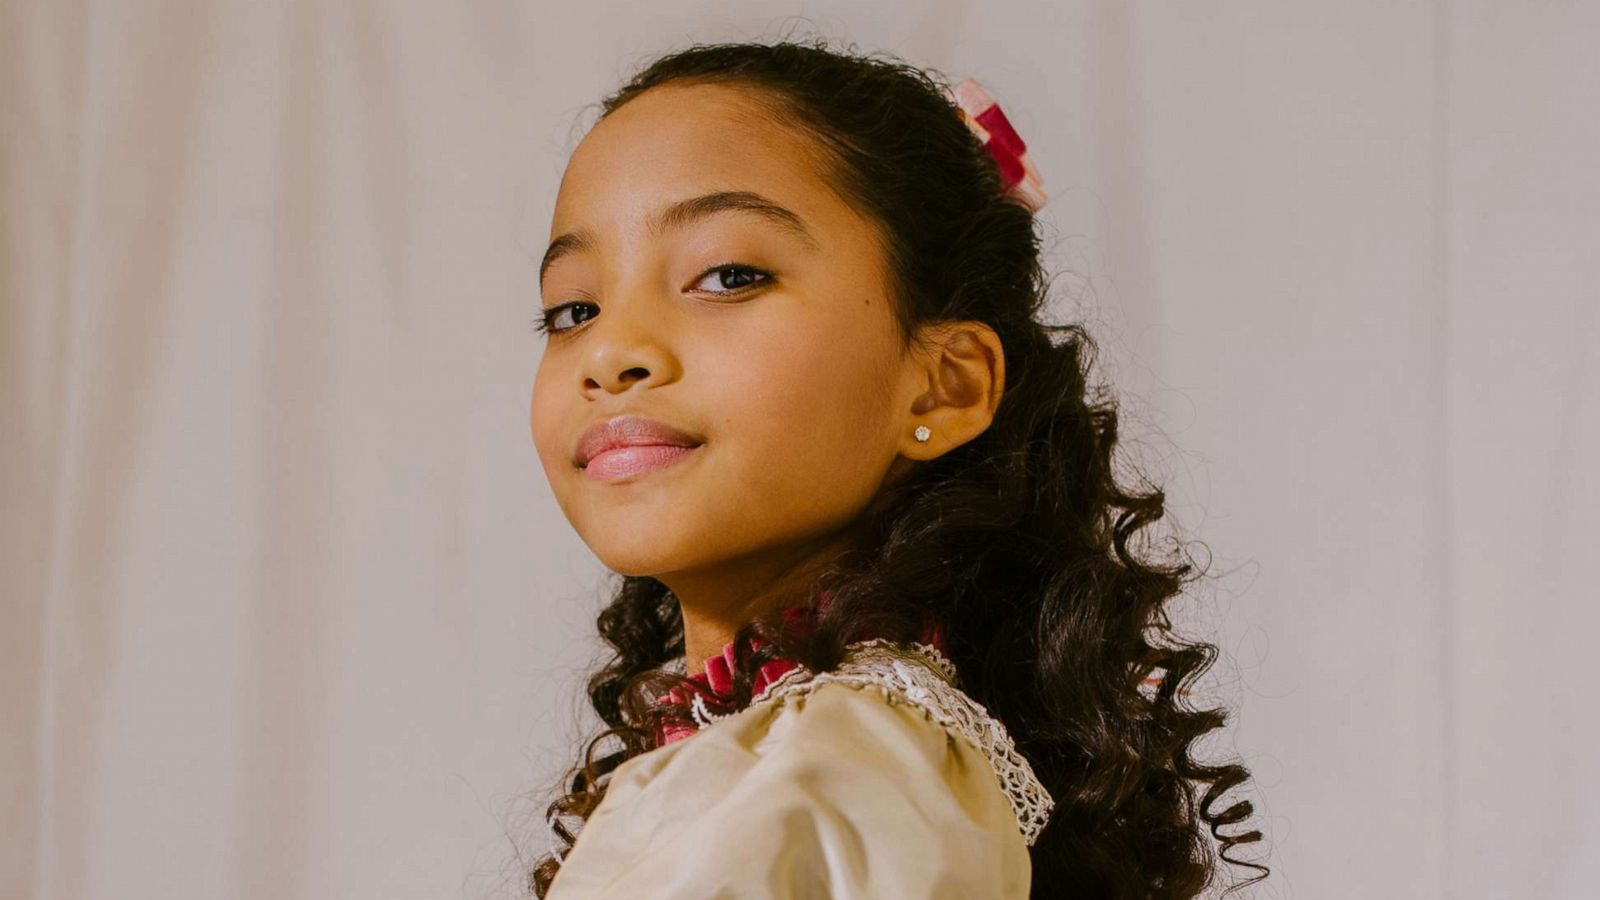 11 Year Old Ballerina Dances Into History As 1st Black Lead In Nyc